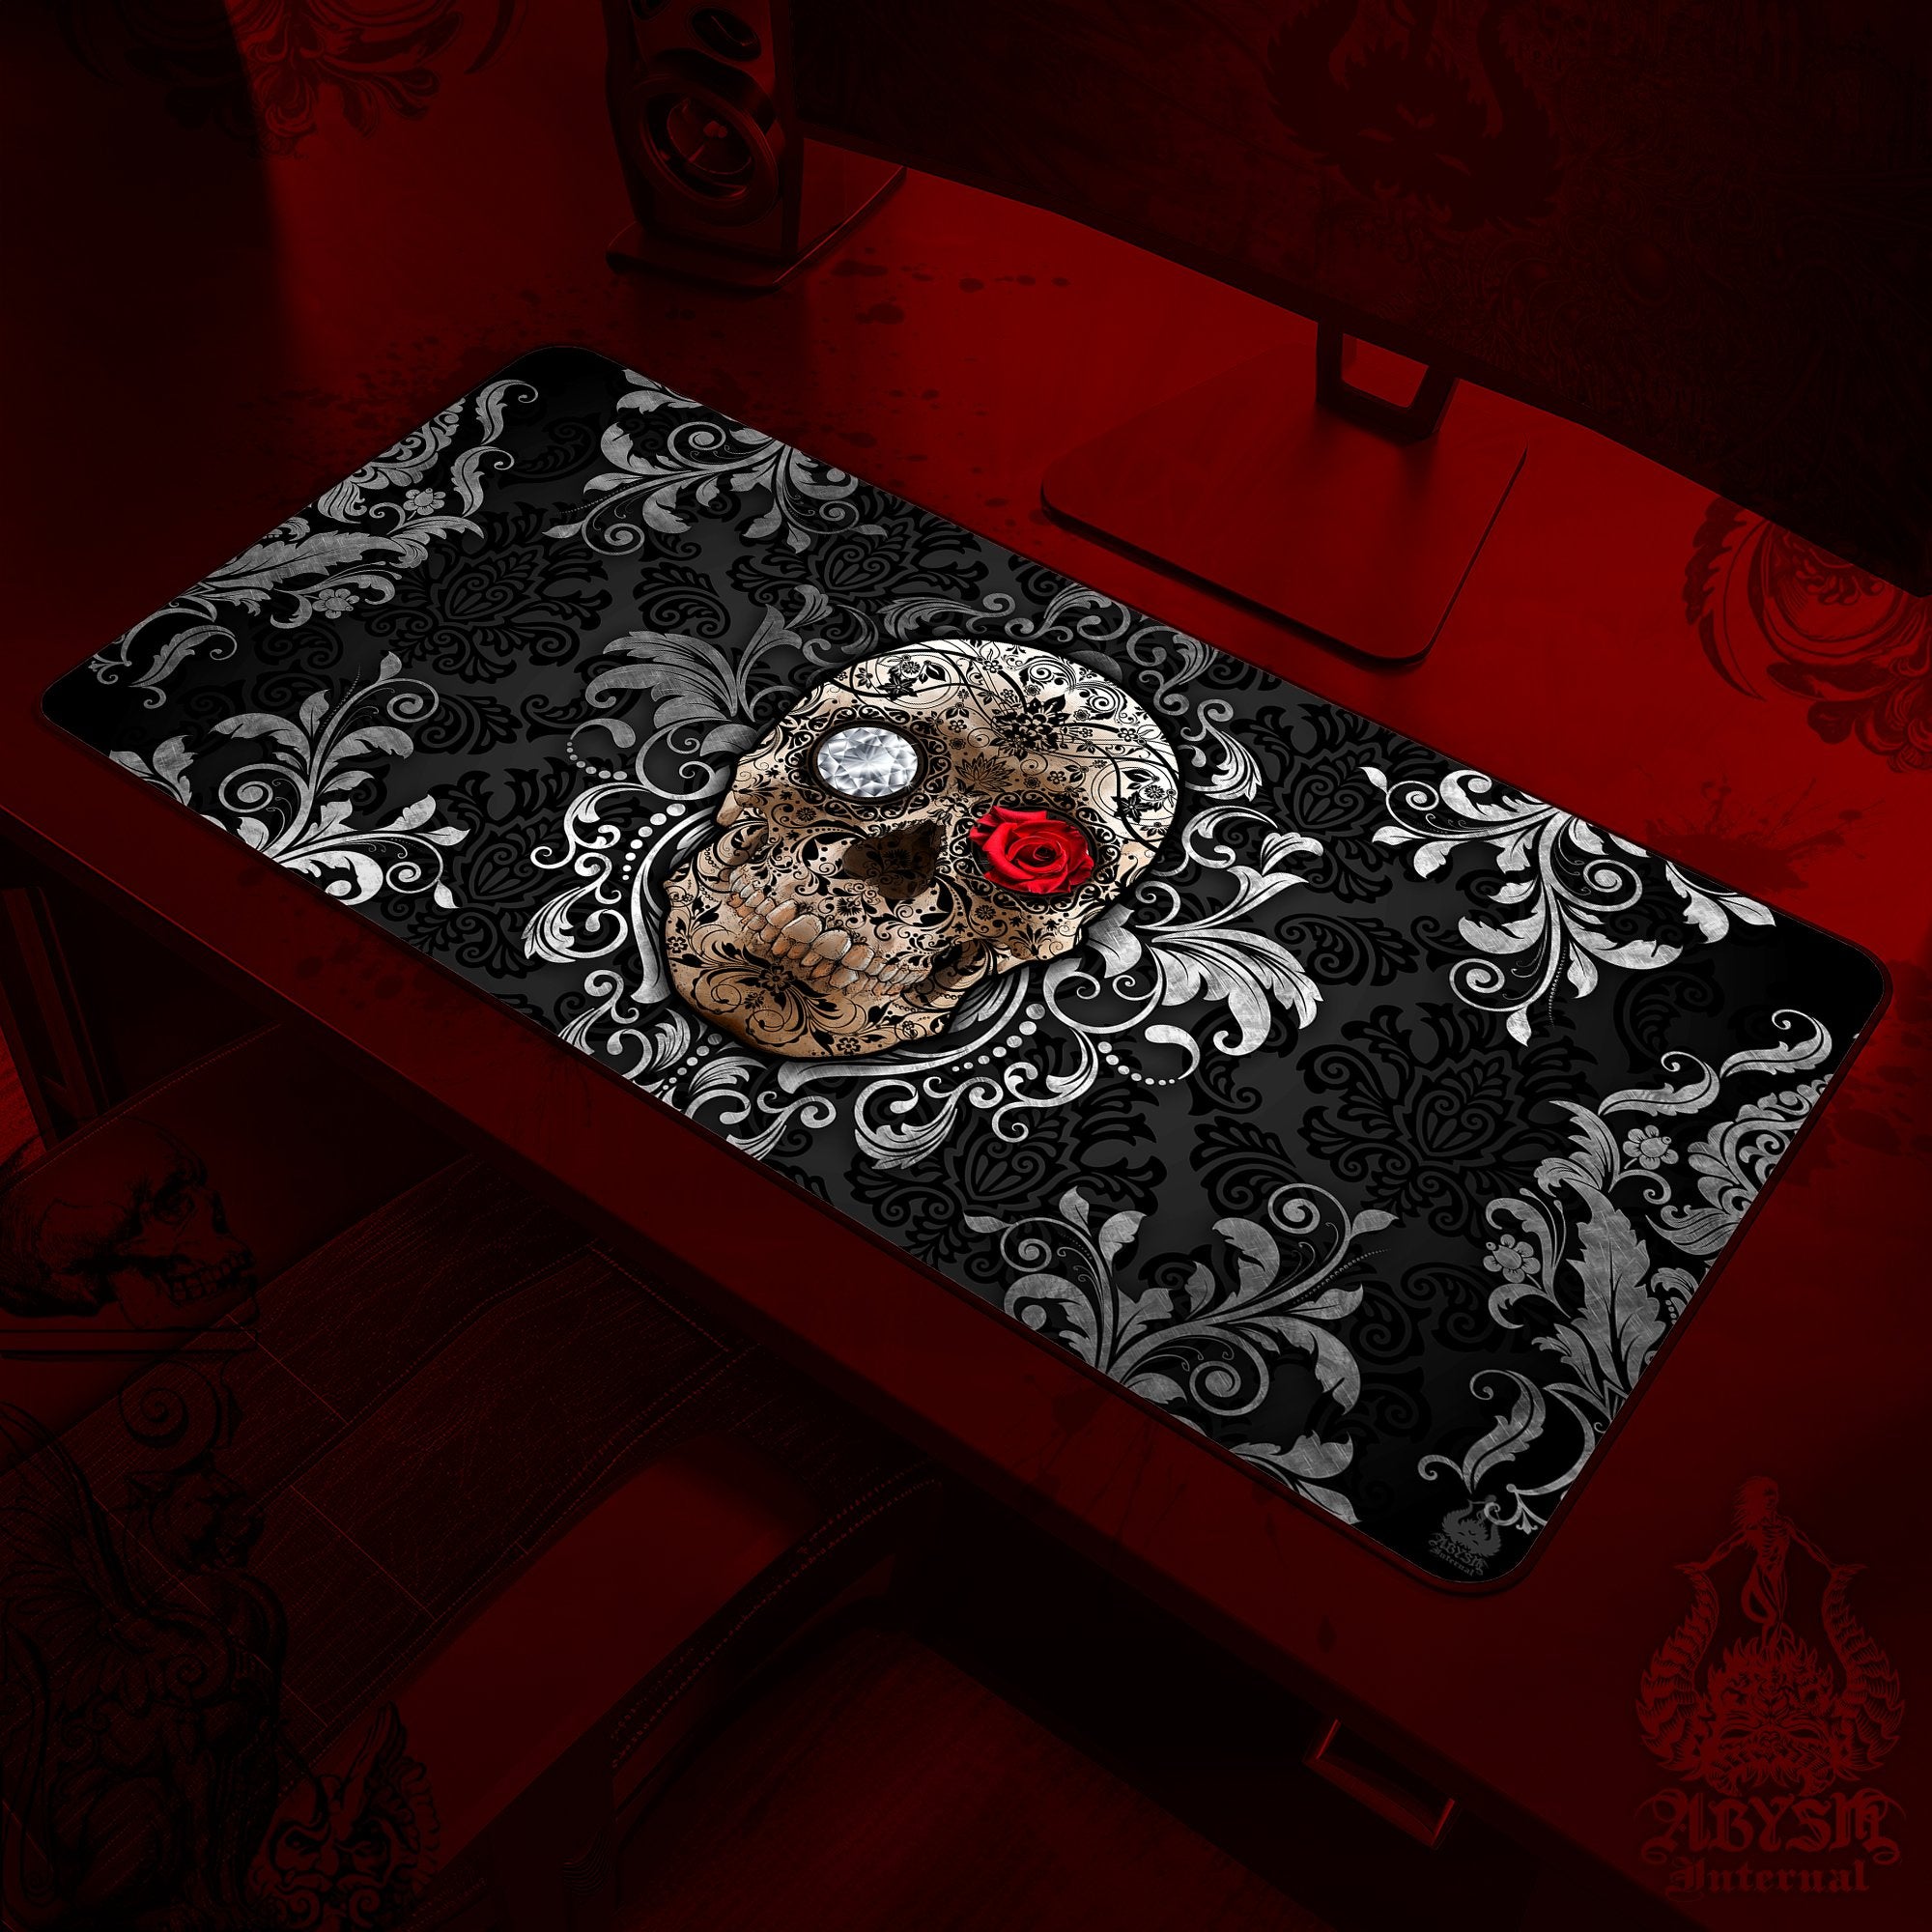 Sugar Skull Mouse Pad, Gothic Gaming Desk Mat, Dia de los Muertos Workpad, Goth Day of the Dead Table Protector Cover, Art Print - Abysm Internal